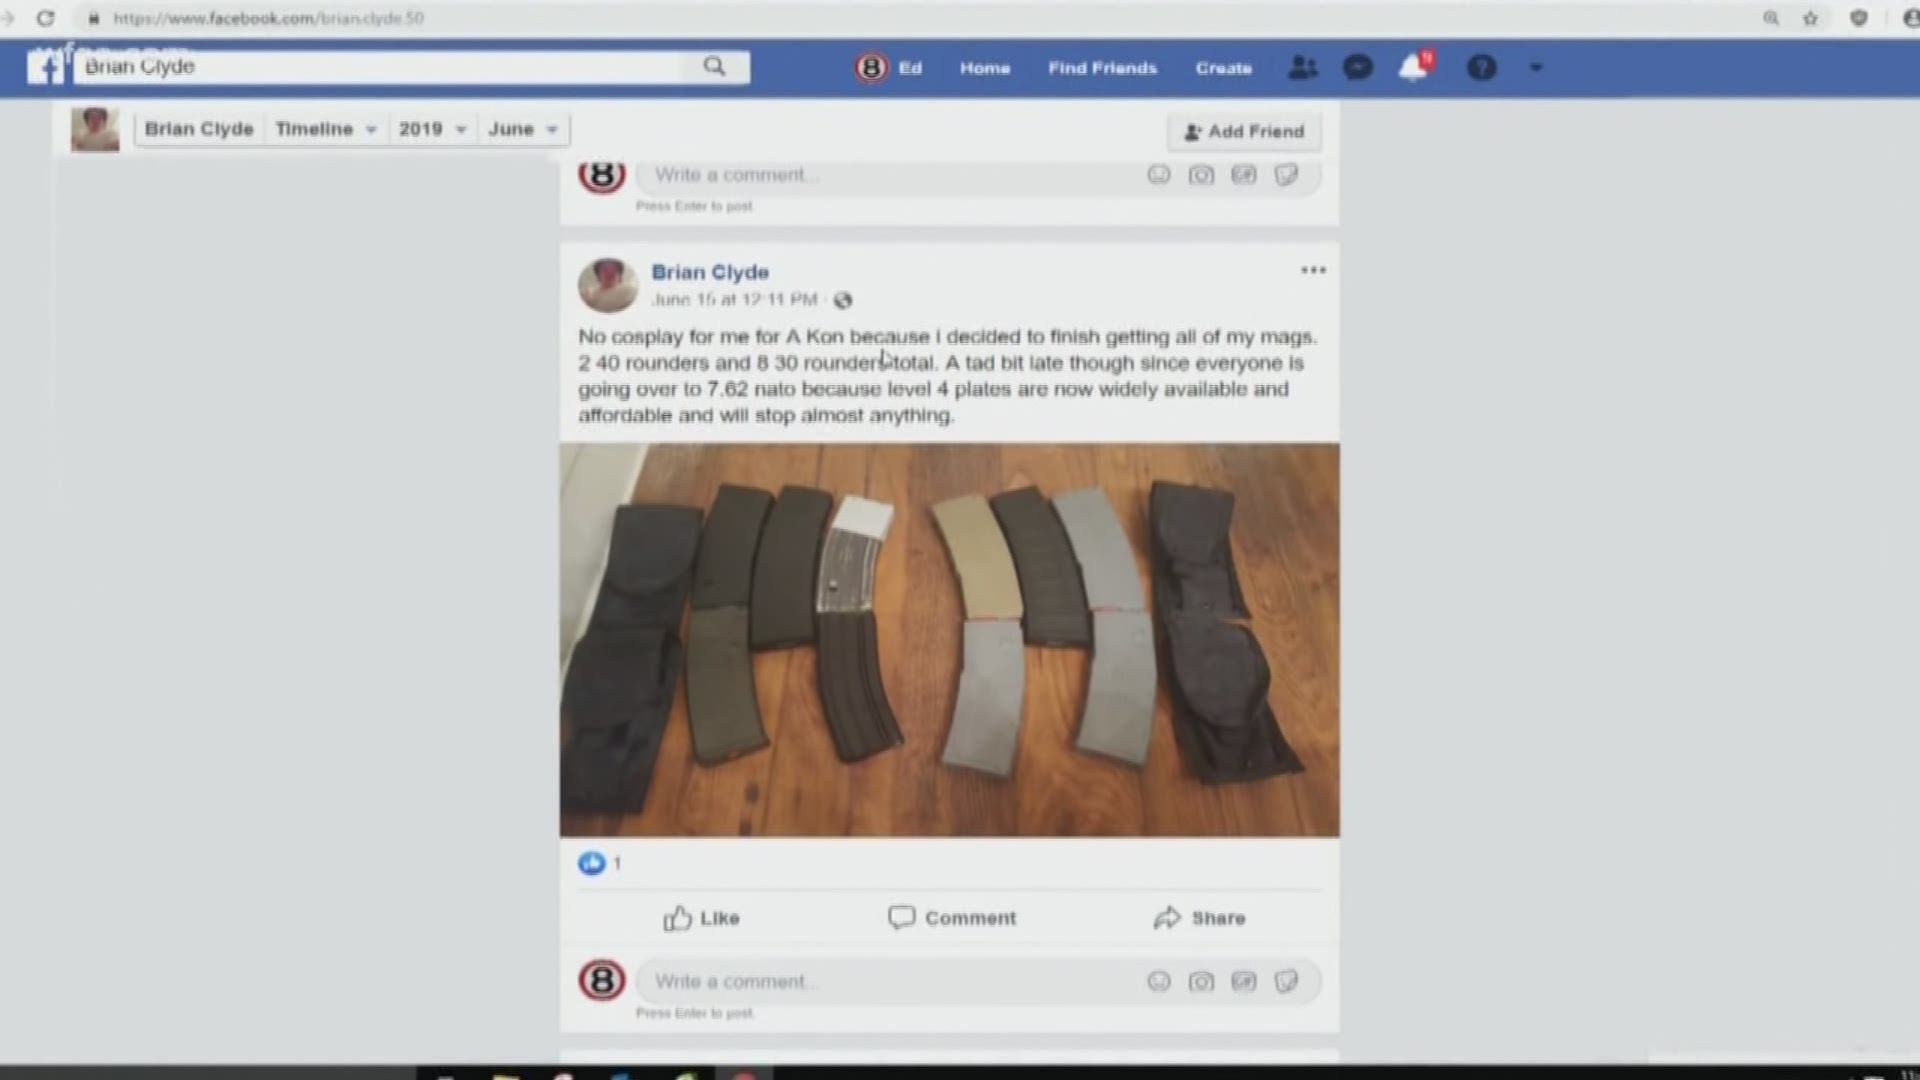 The shooter had what appears to be an obsession with guns, and posted about them a lot.